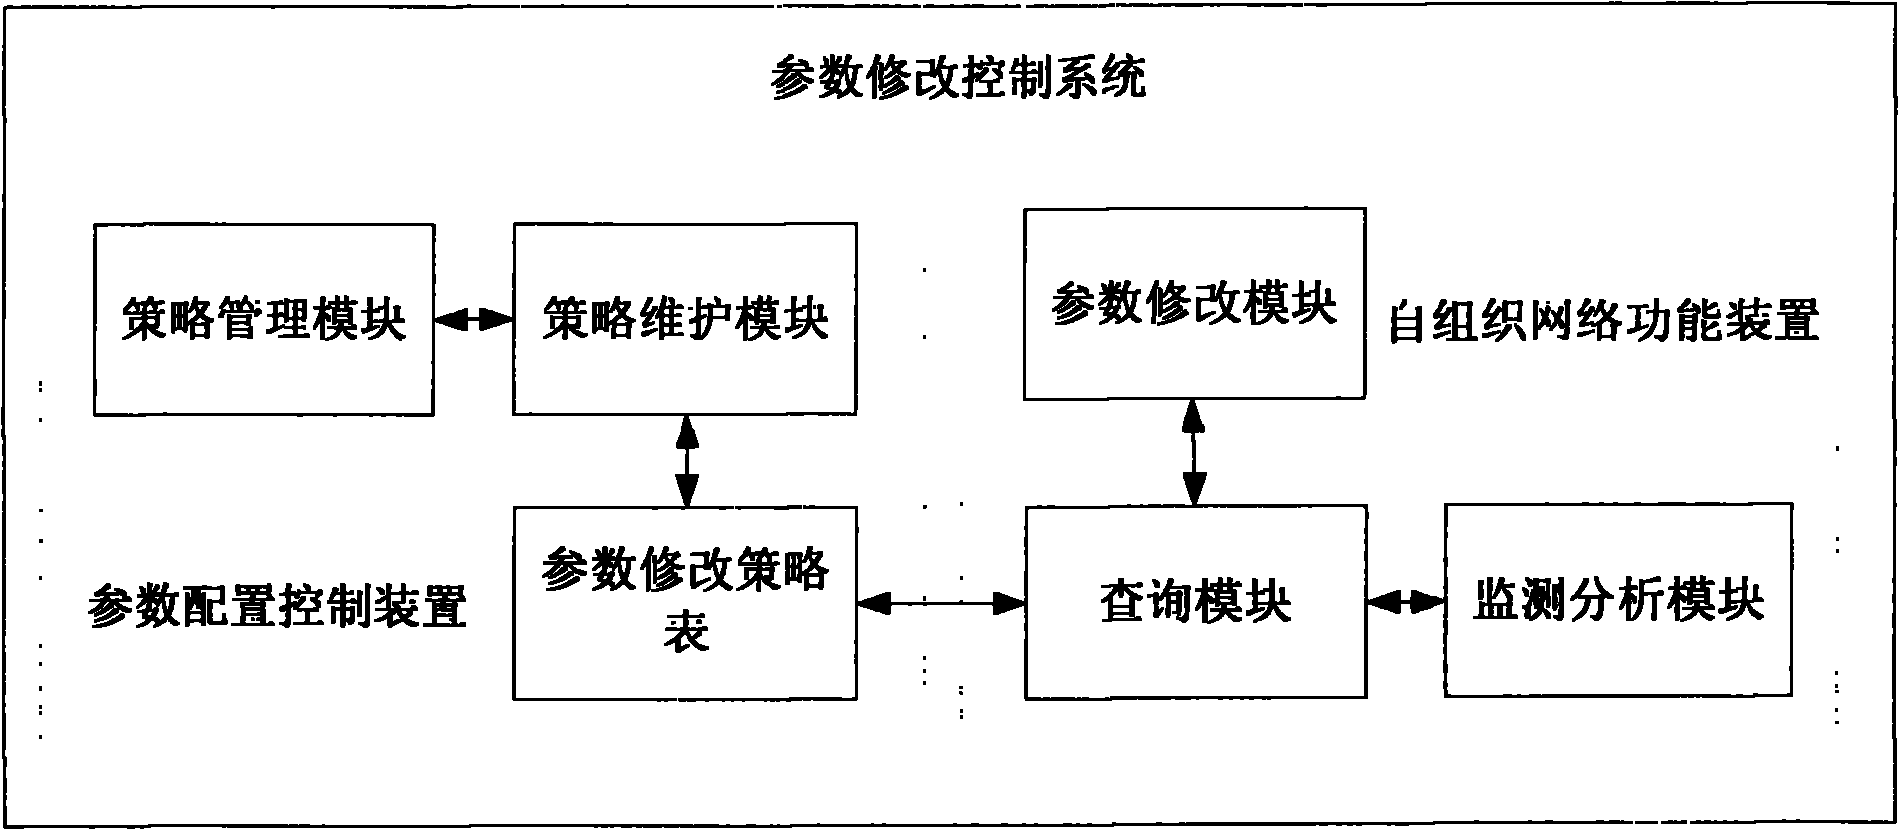 Self-organization network parameter configuration control method and parameter modification control system